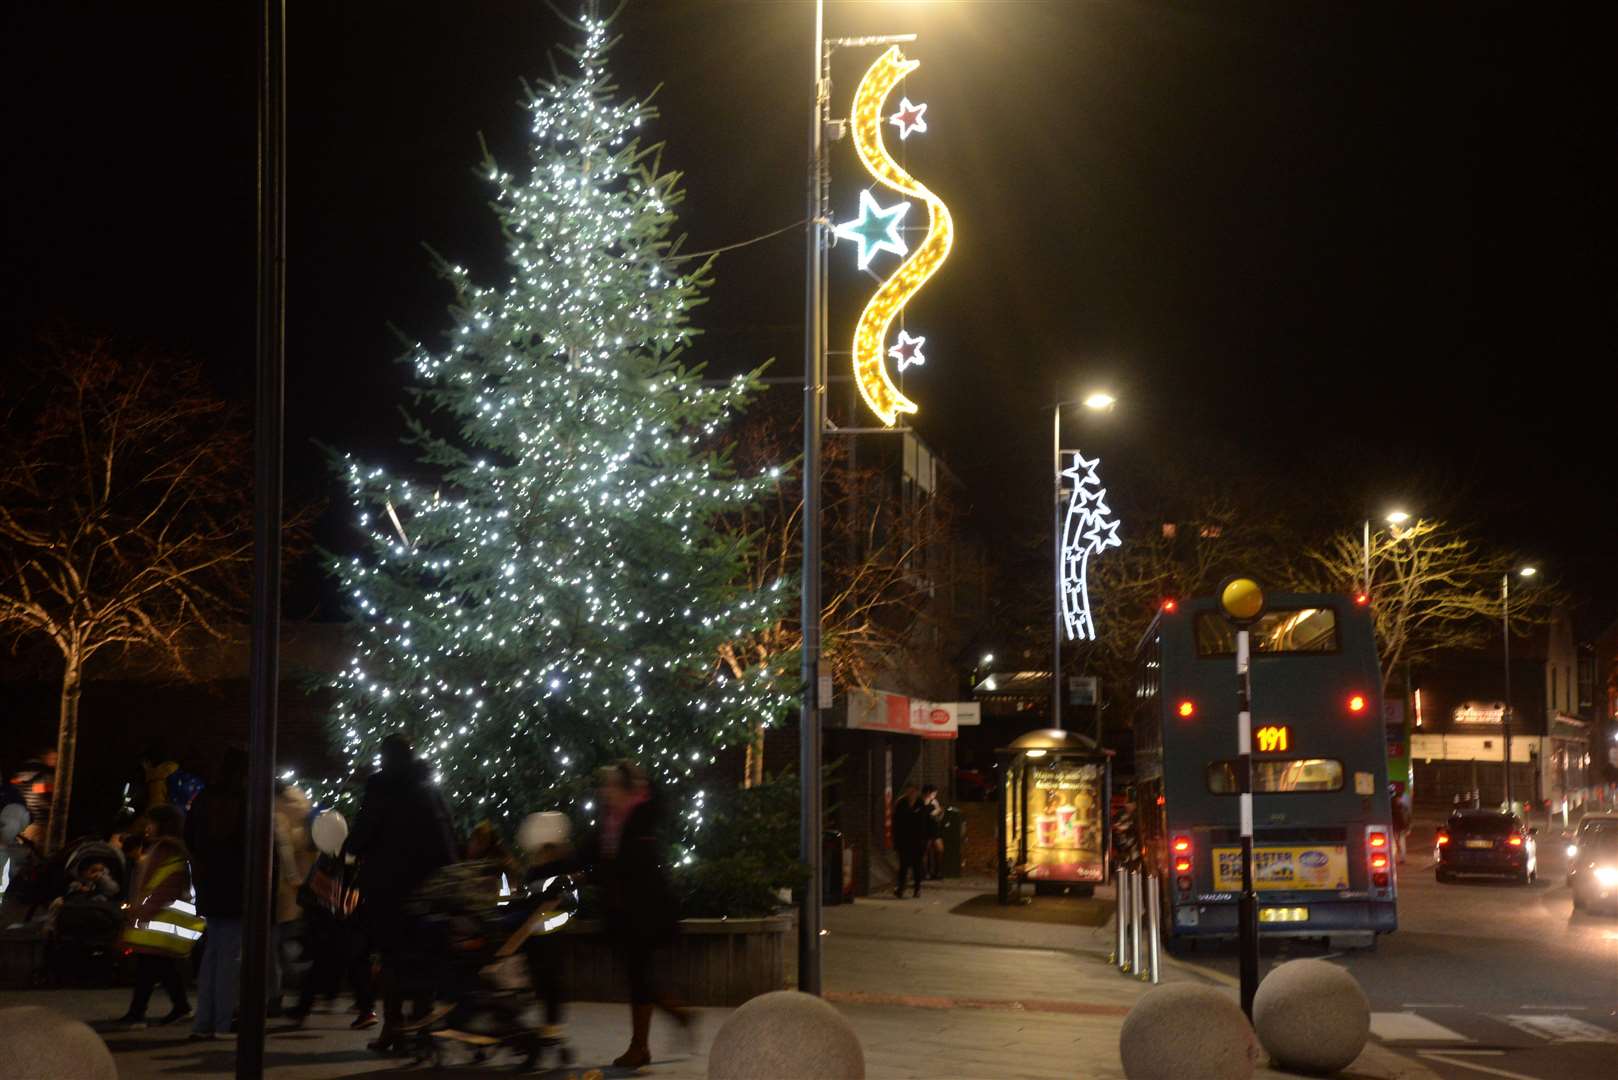 The Christmas Lights in Strood on Friday evening. Picture: Chris Davey